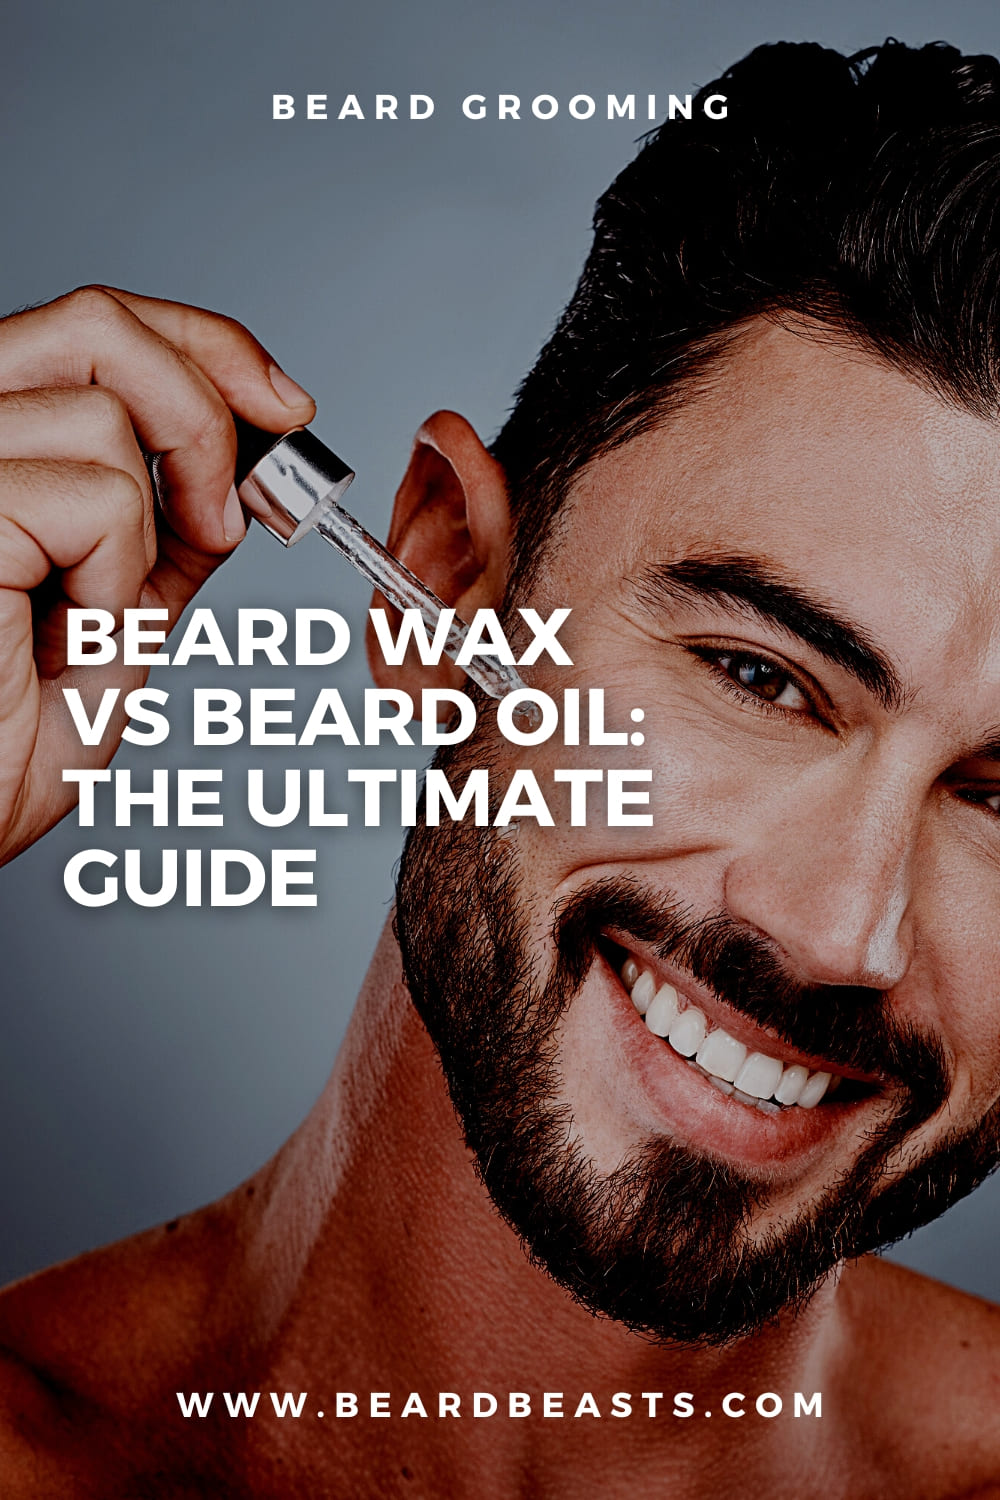 An image of a smiling man with a well-groomed beard, applying beard oil with a dropper. The text overlay reads "Beard Grooming - Beard Wax vs Beard Oil: The Ultimate Guide" with the website "www.beardbeasts.com" featured at the bottom.